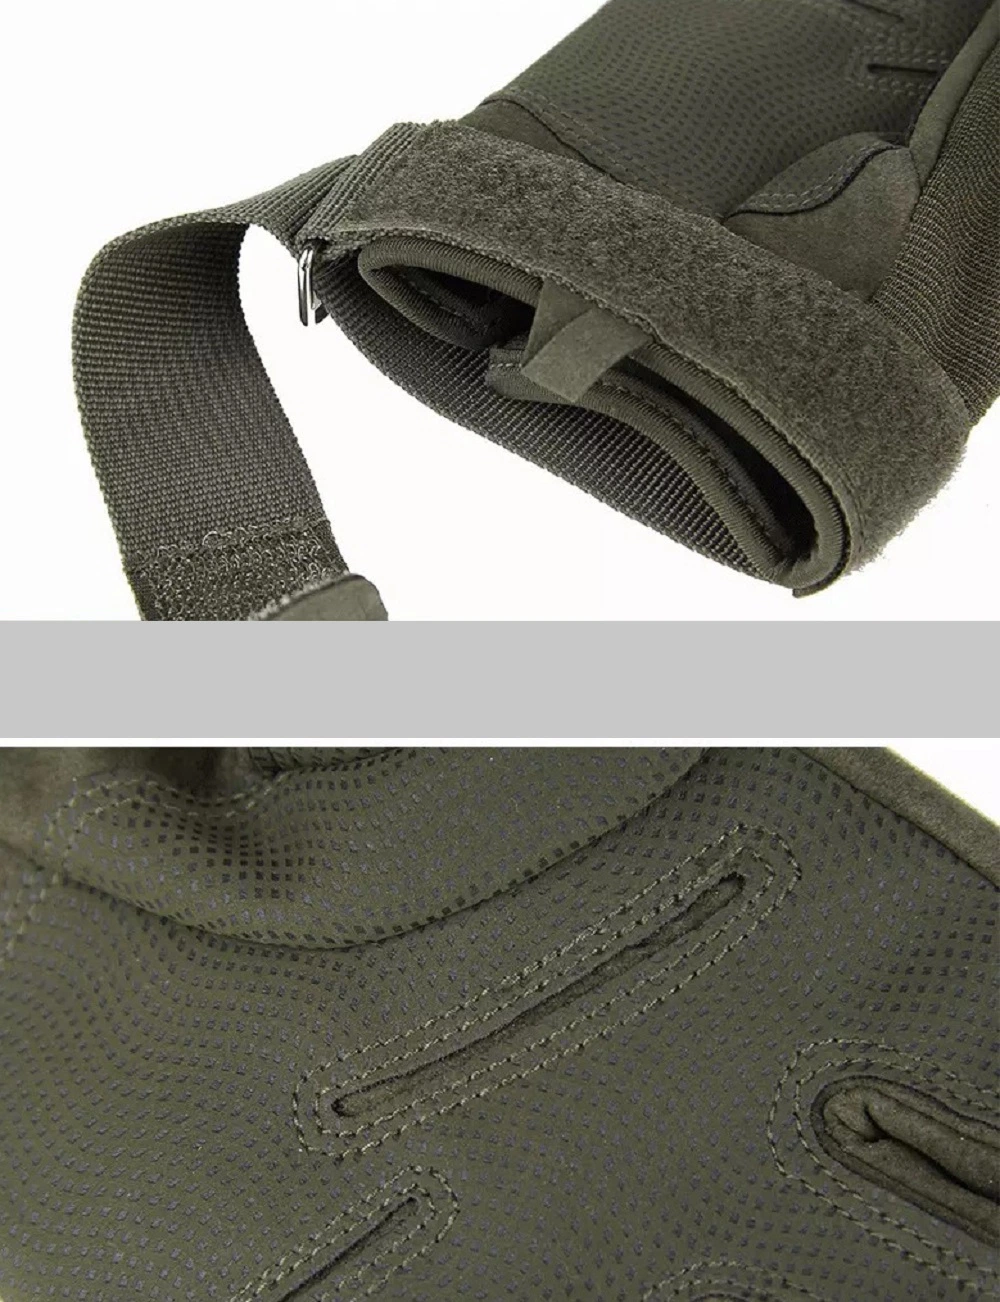 Full Finger Safety Gloves Cycling Riding Sports Training Hand Protection Ci14521